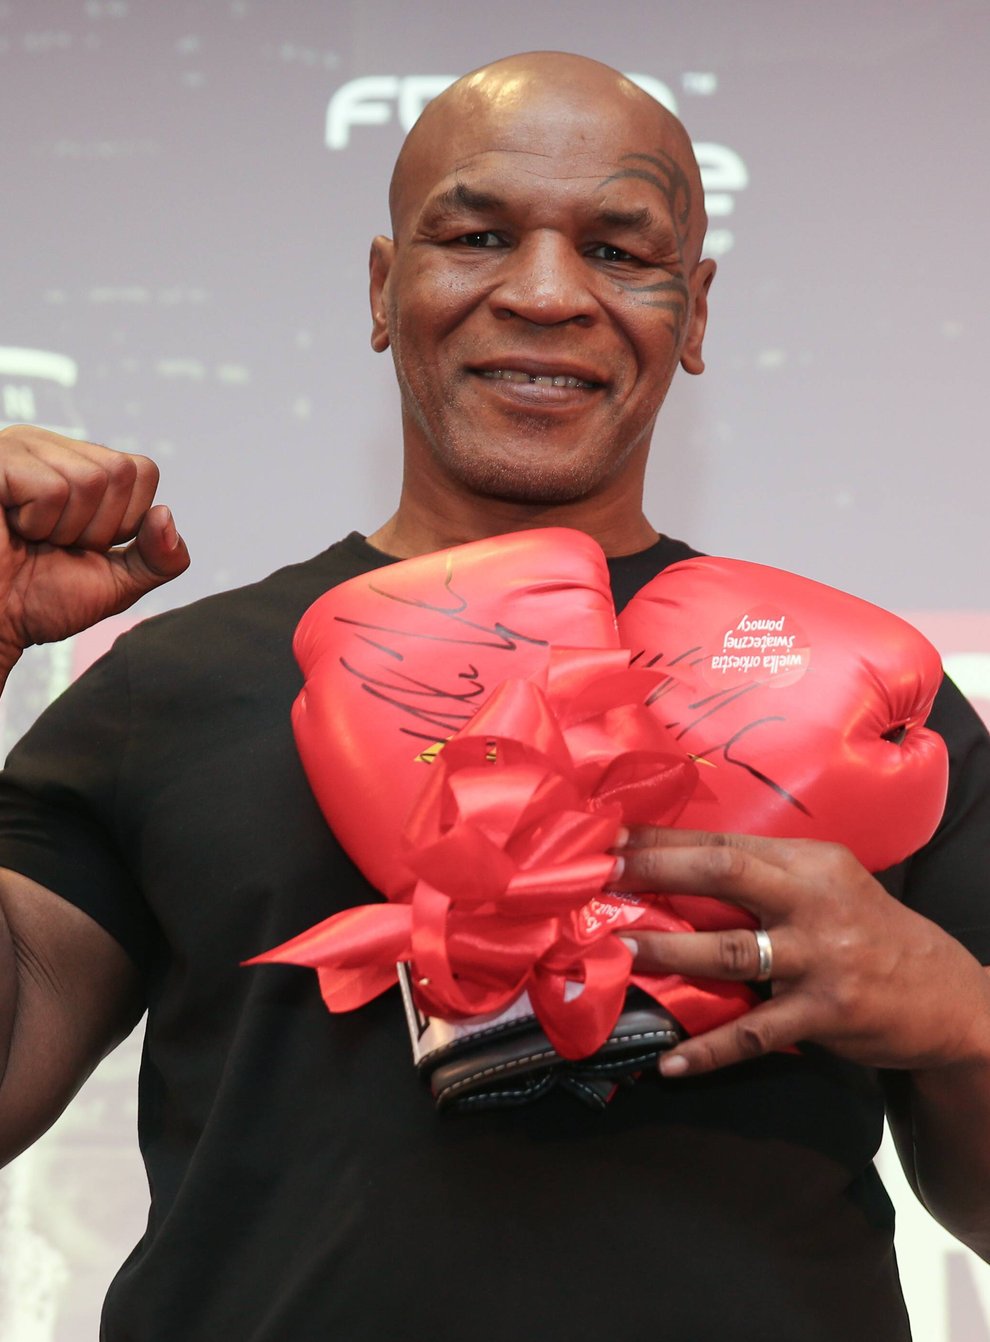 Tyson will return to the ring for the first time in 15 years in November